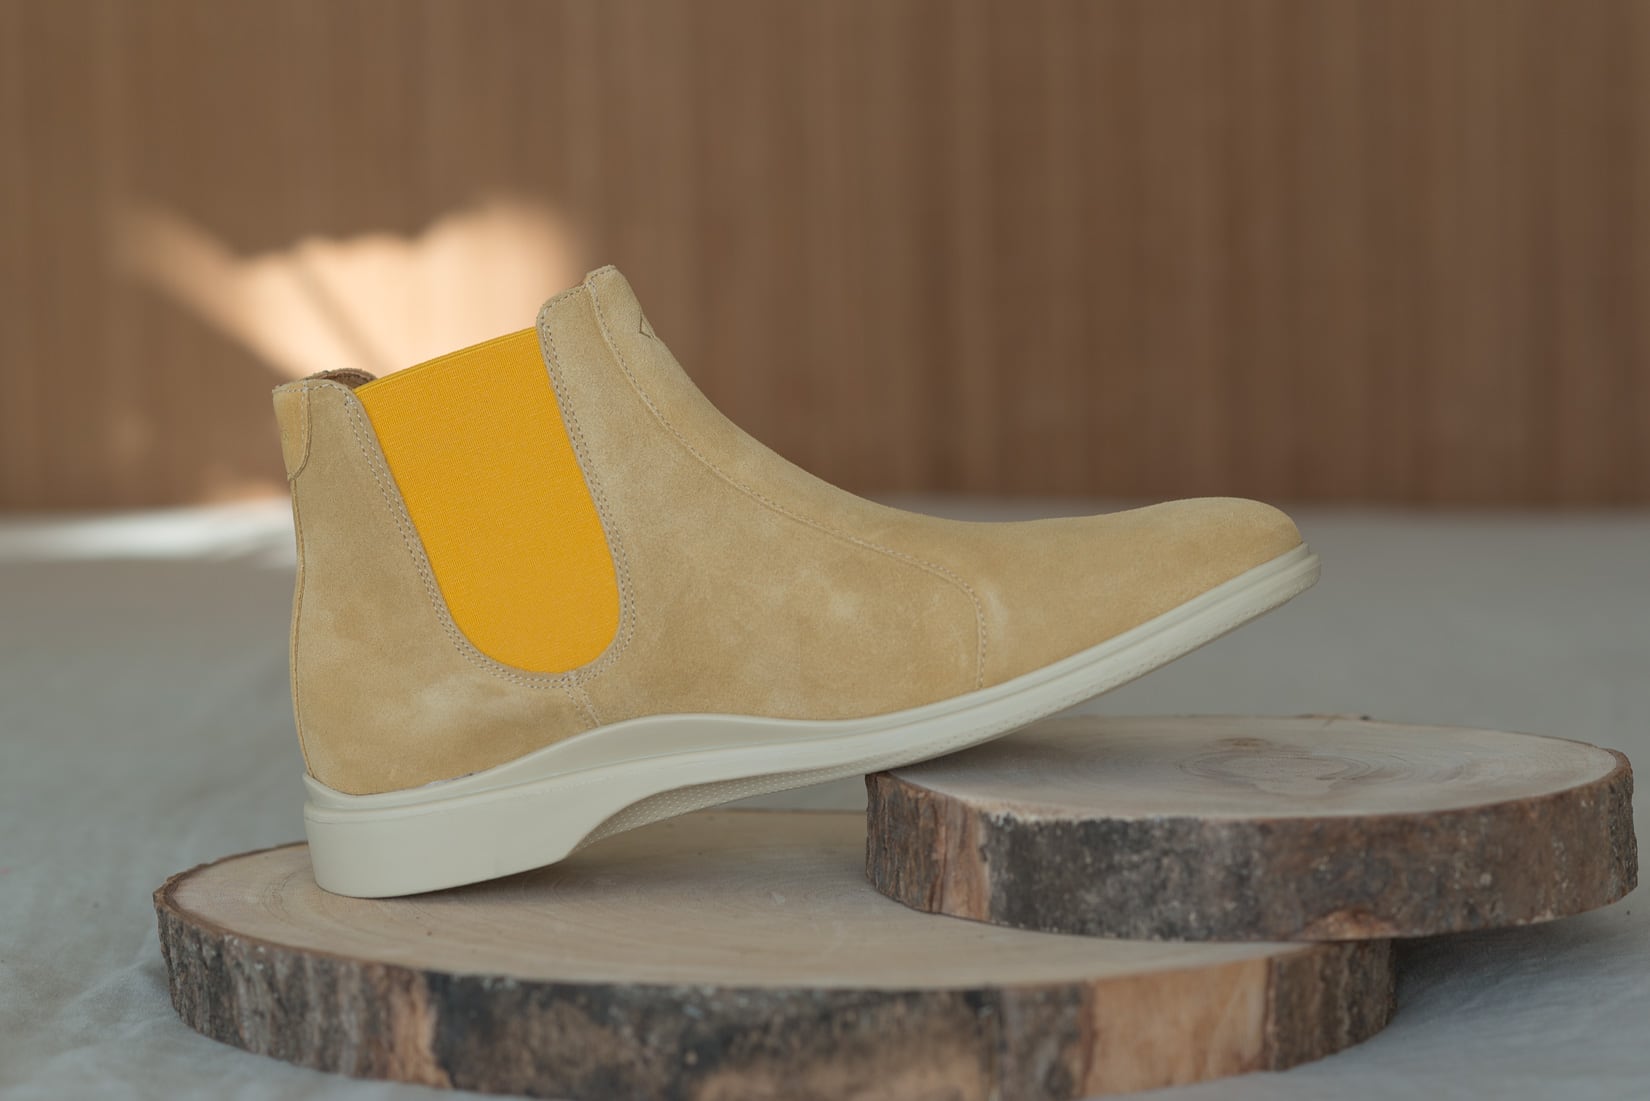 Amberjack Chelsea boots left review - Luxe Digital